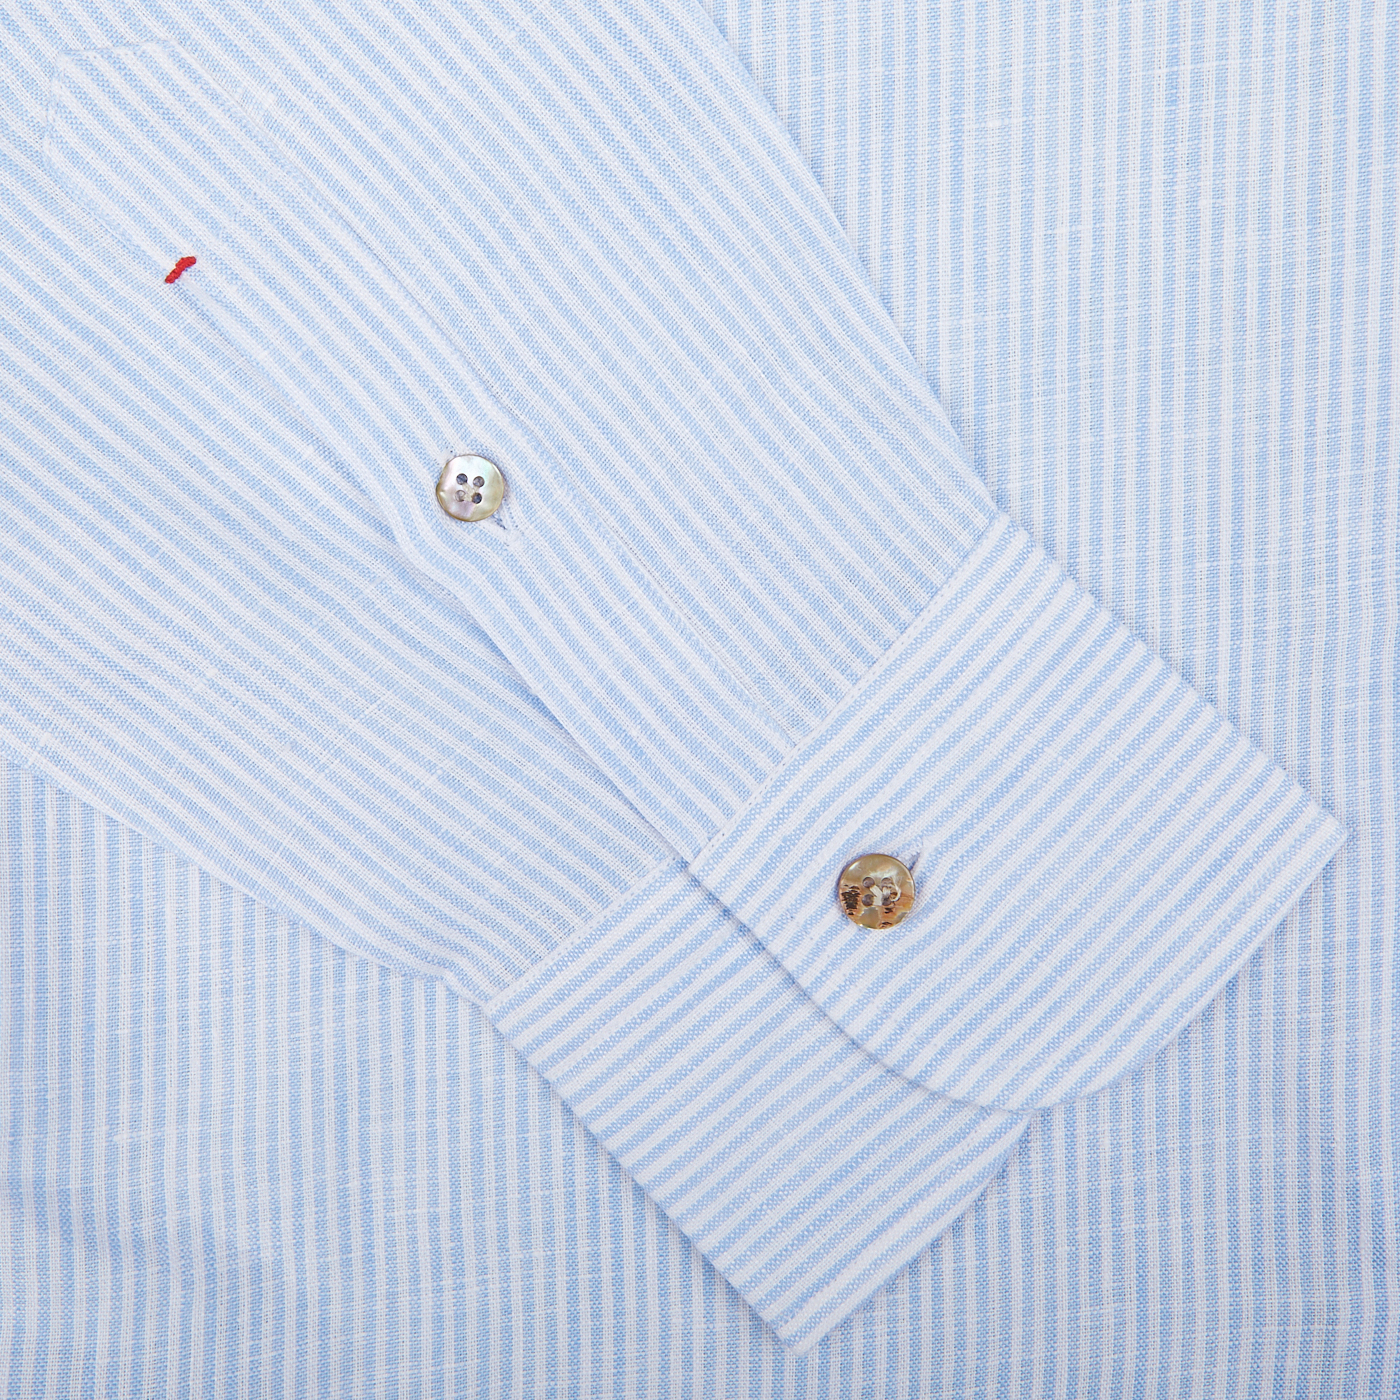 A close-up of a Mazzarelli Blue Striped organic linen summer shirt with a focus on the cuff and button.